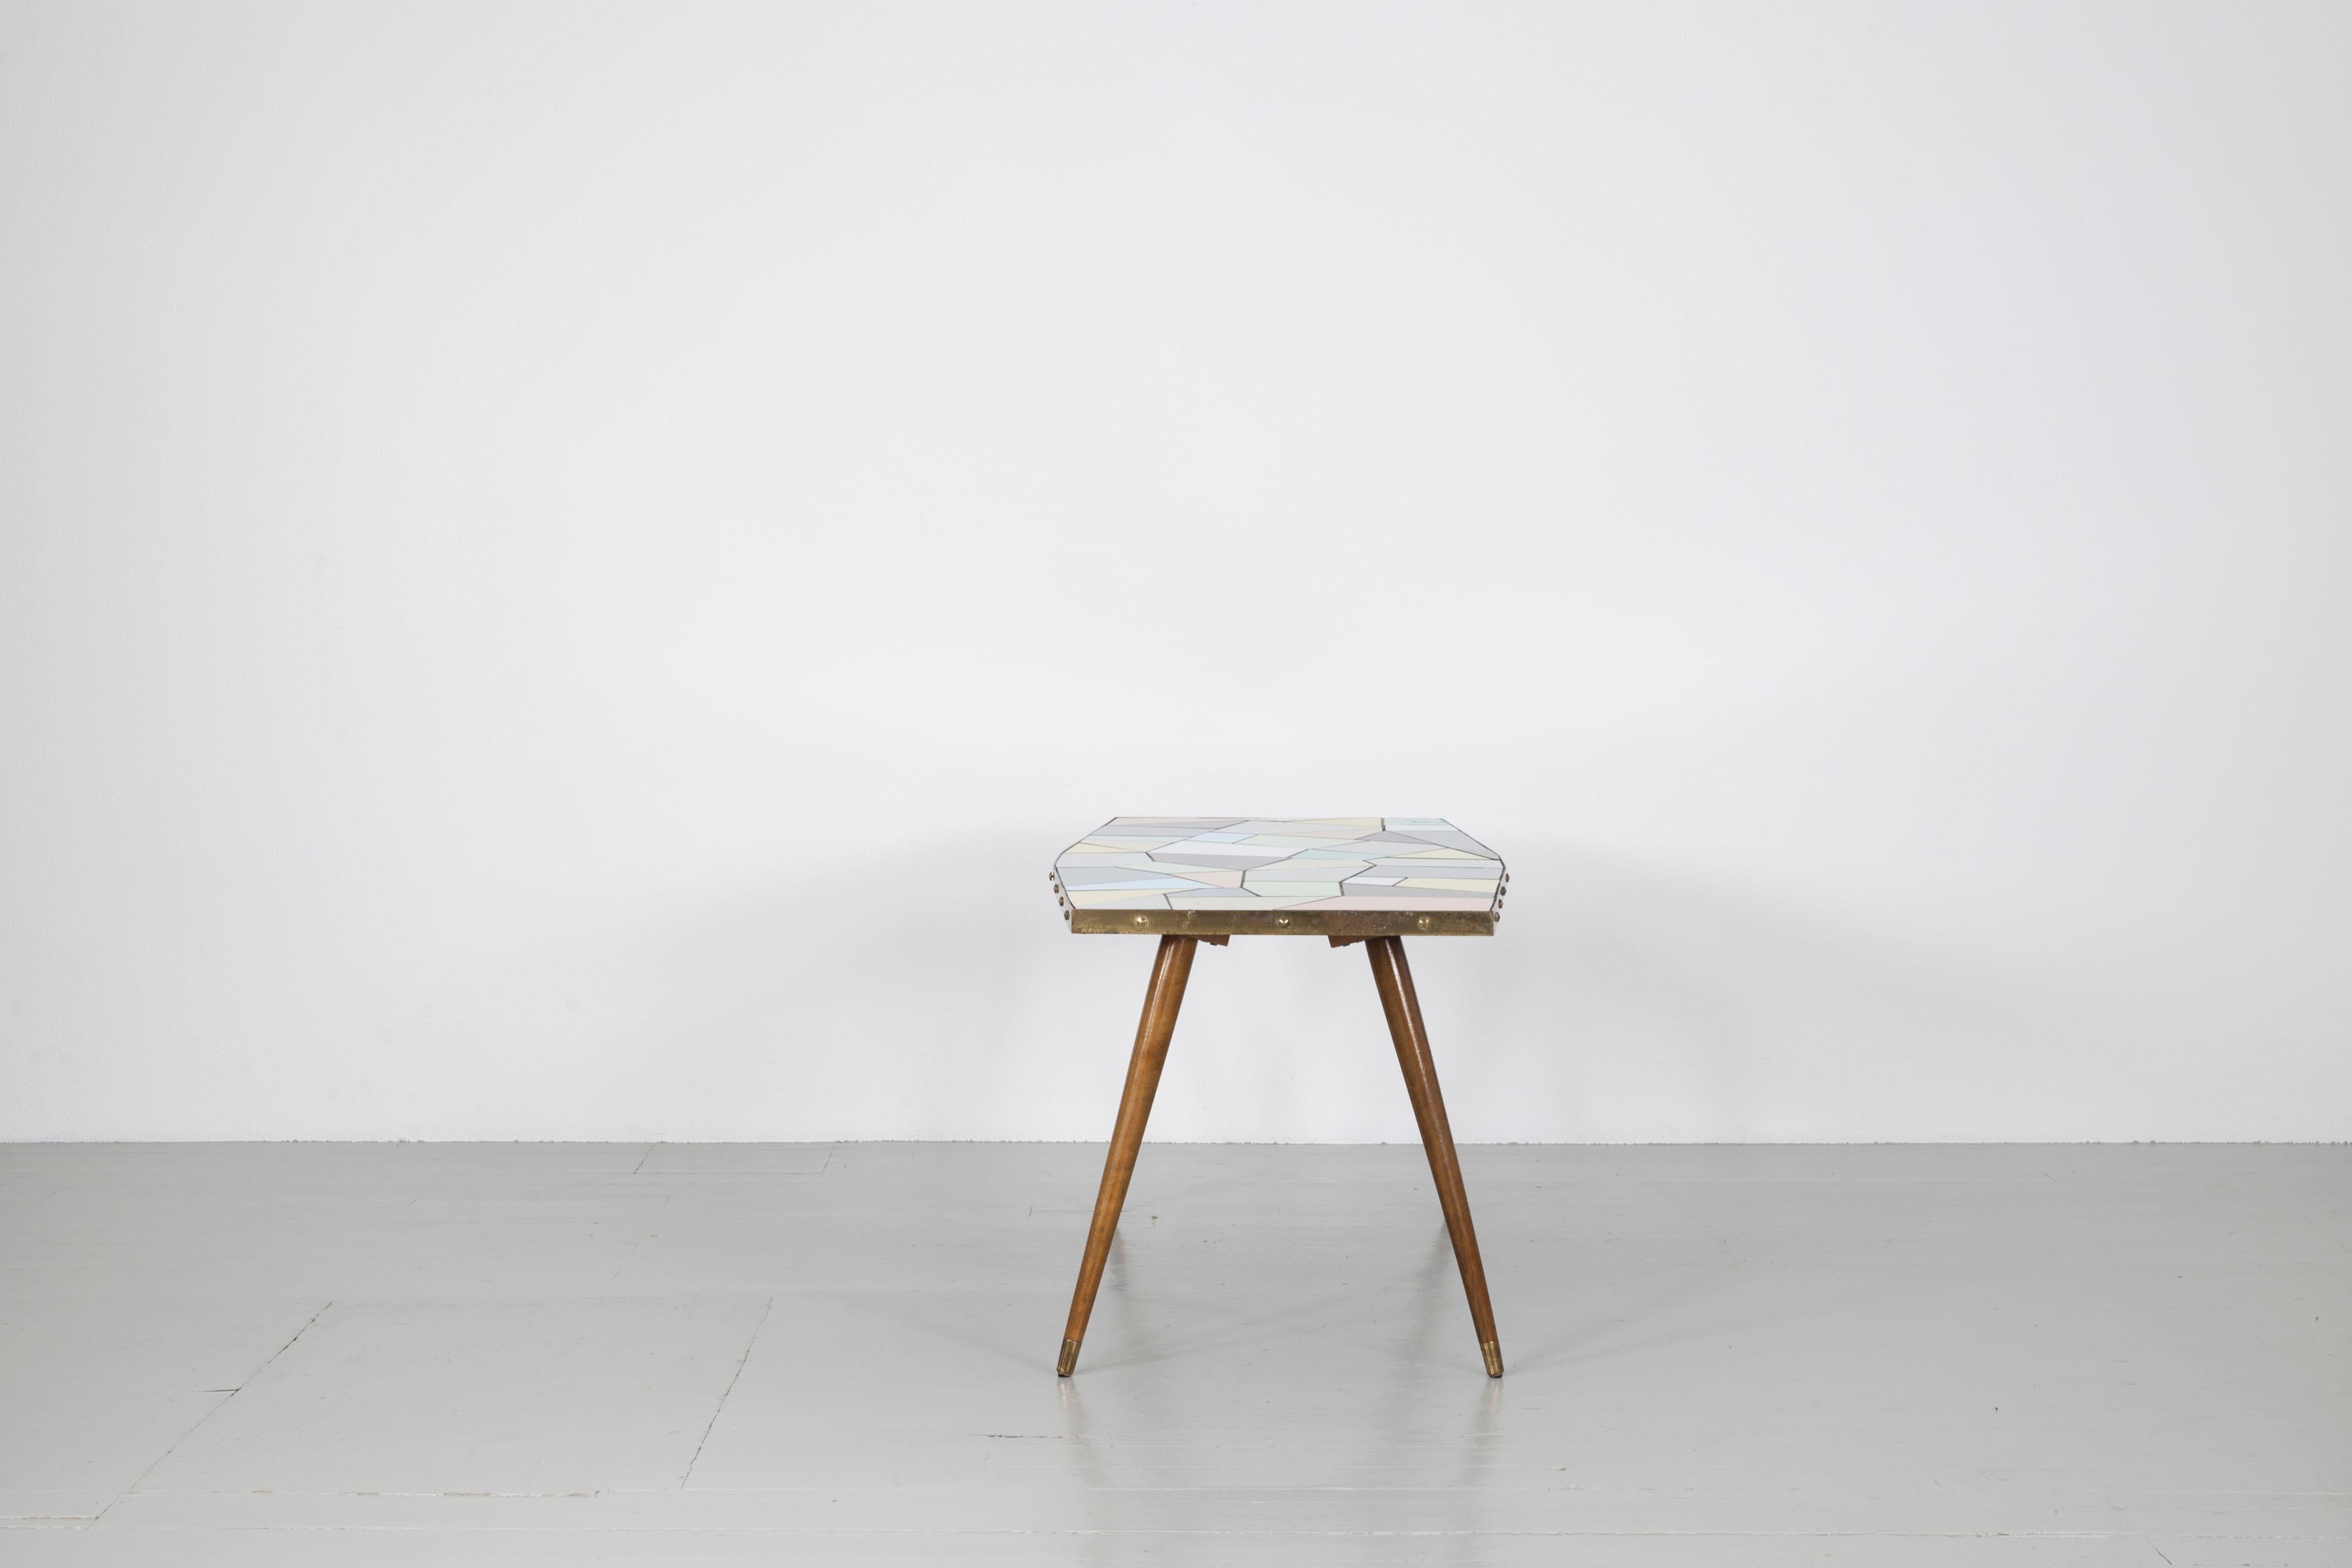 This table was made in Germany in the 1950s. The combination of robust materials and soft colour tones gives the table a special appearance. The table top is covered with tiles in soft pastel shades, white and black and surrounded by a shiny brass